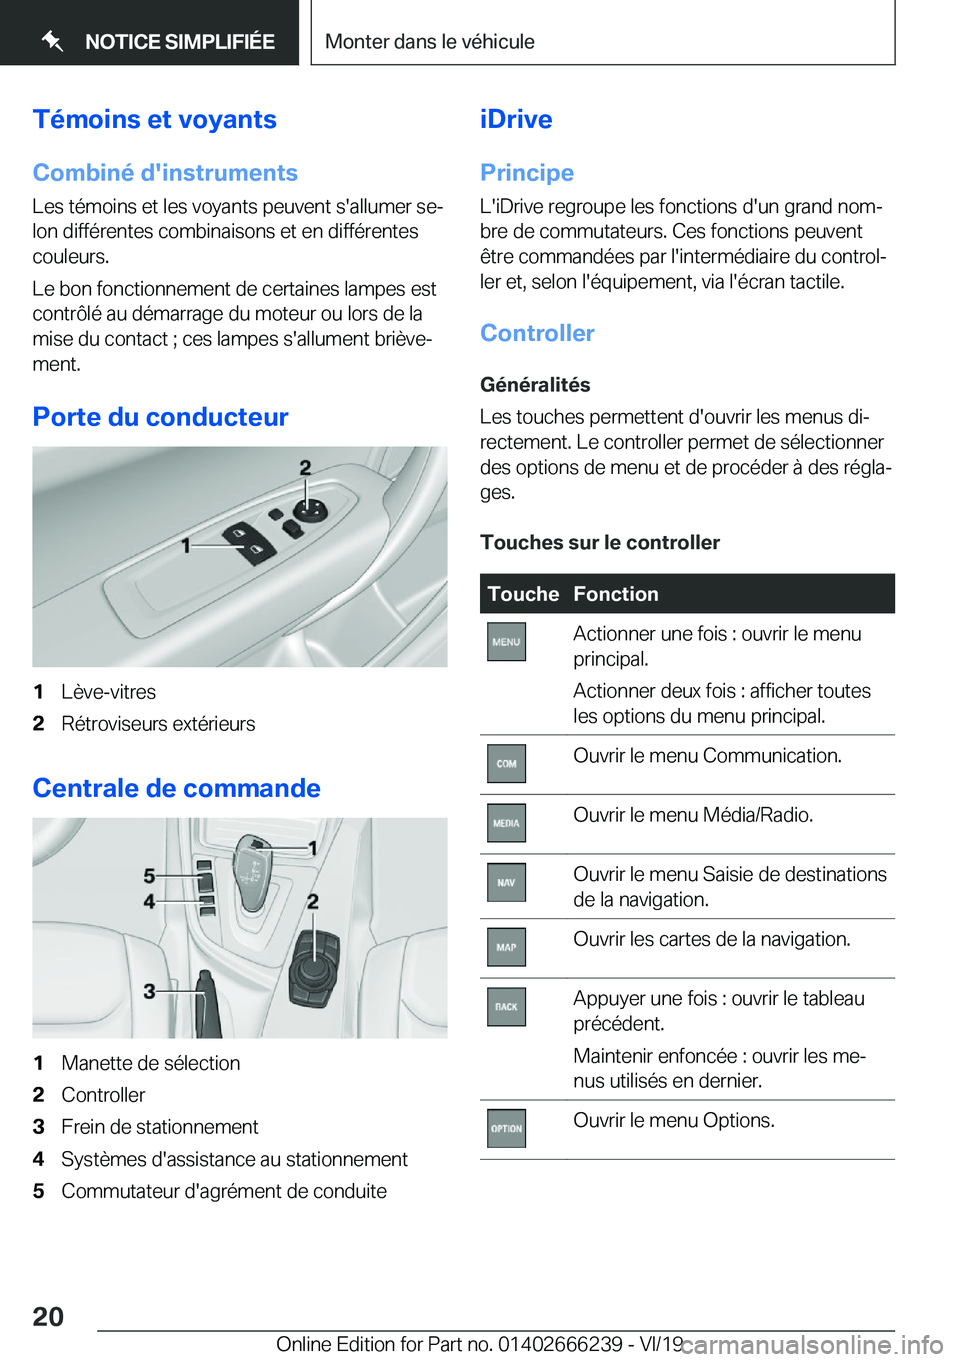 BMW 2 SERIES COUPE 2020  Notices Demploi (in French) �T�é�m�o�i�n�s��e�t��v�o�y�a�n�t�s
�C�o�m�b�i�n�é��d�'�i�n�s�t�r�u�m�e�n�t�s �L�e�s��t�é�m�o�i�n�s��e�t��l�e�s��v�o�y�a�n�t�s��p�e�u�v�e�n�t��s�'�a�l�l�u�m�e�r��s�ej
�l�o�n��d�i